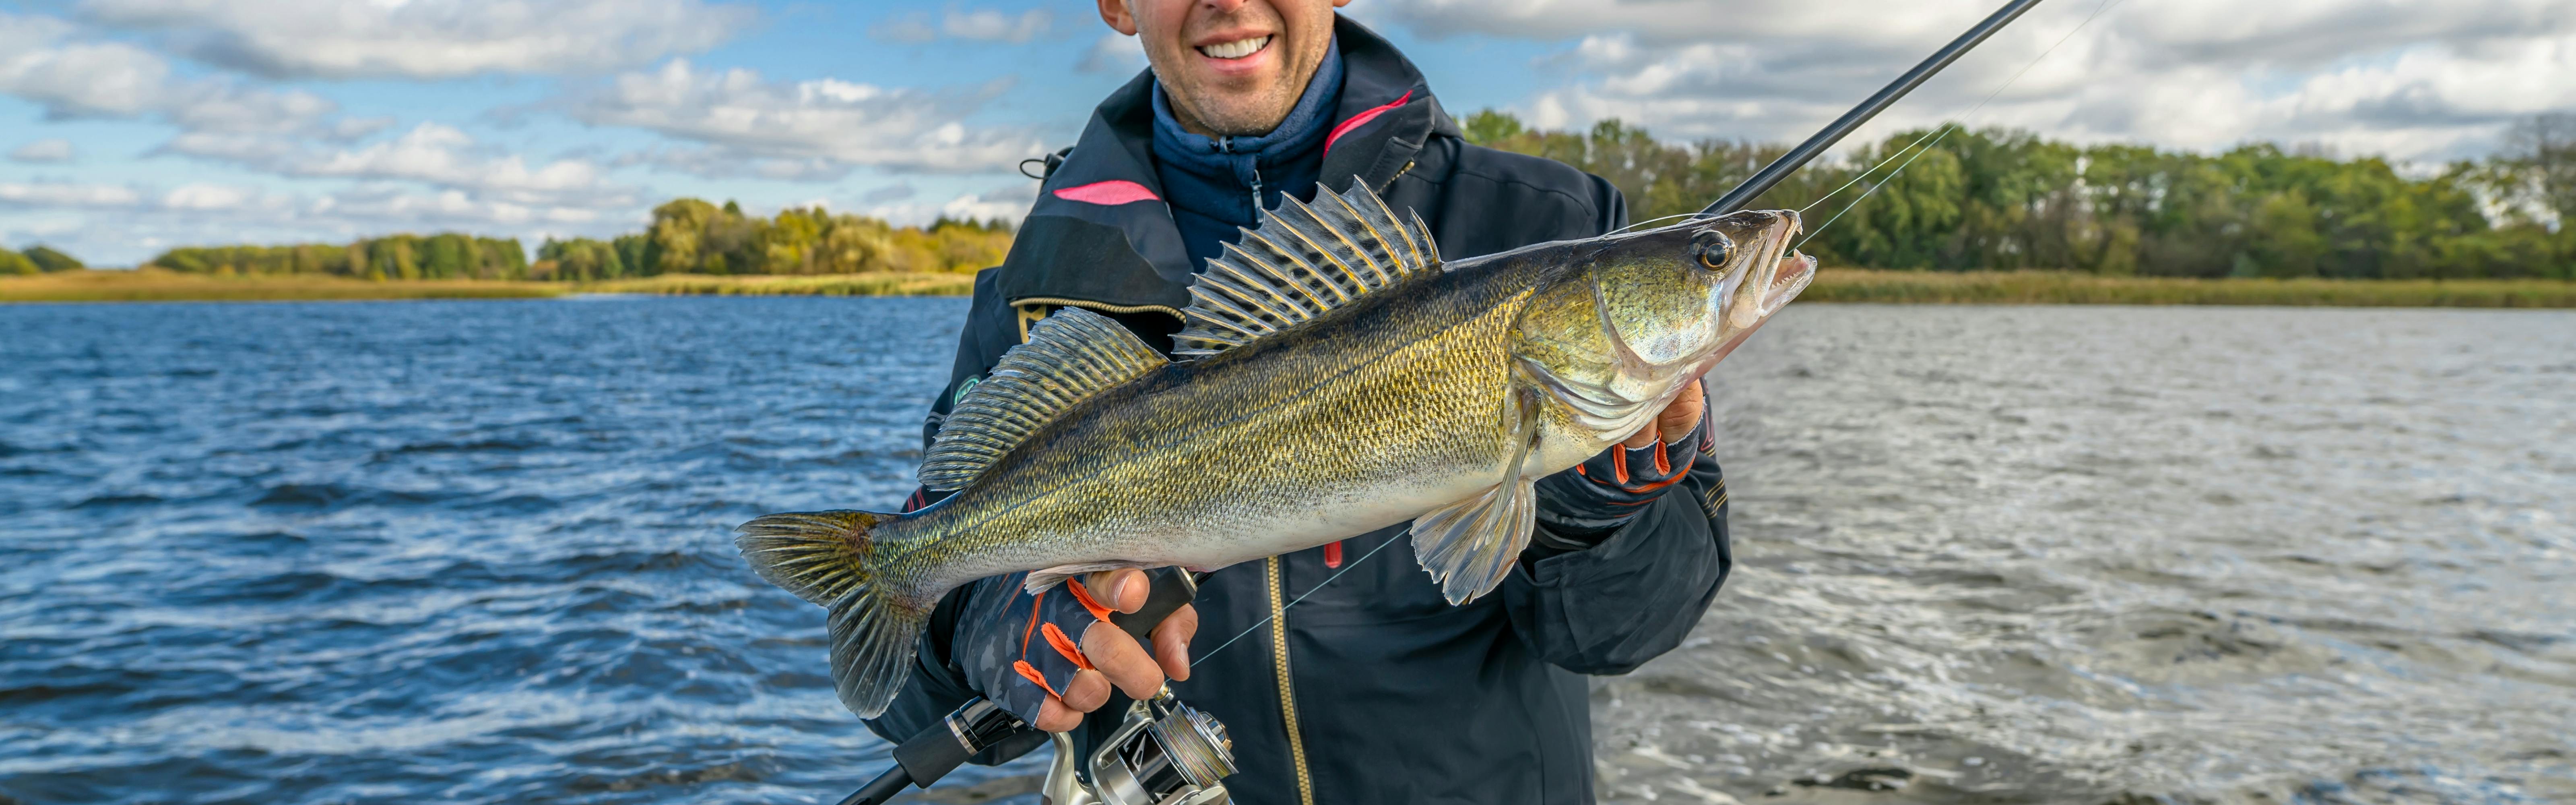 Walleye Fishing Gear Decoded: An Expert Guide to the Best Rods